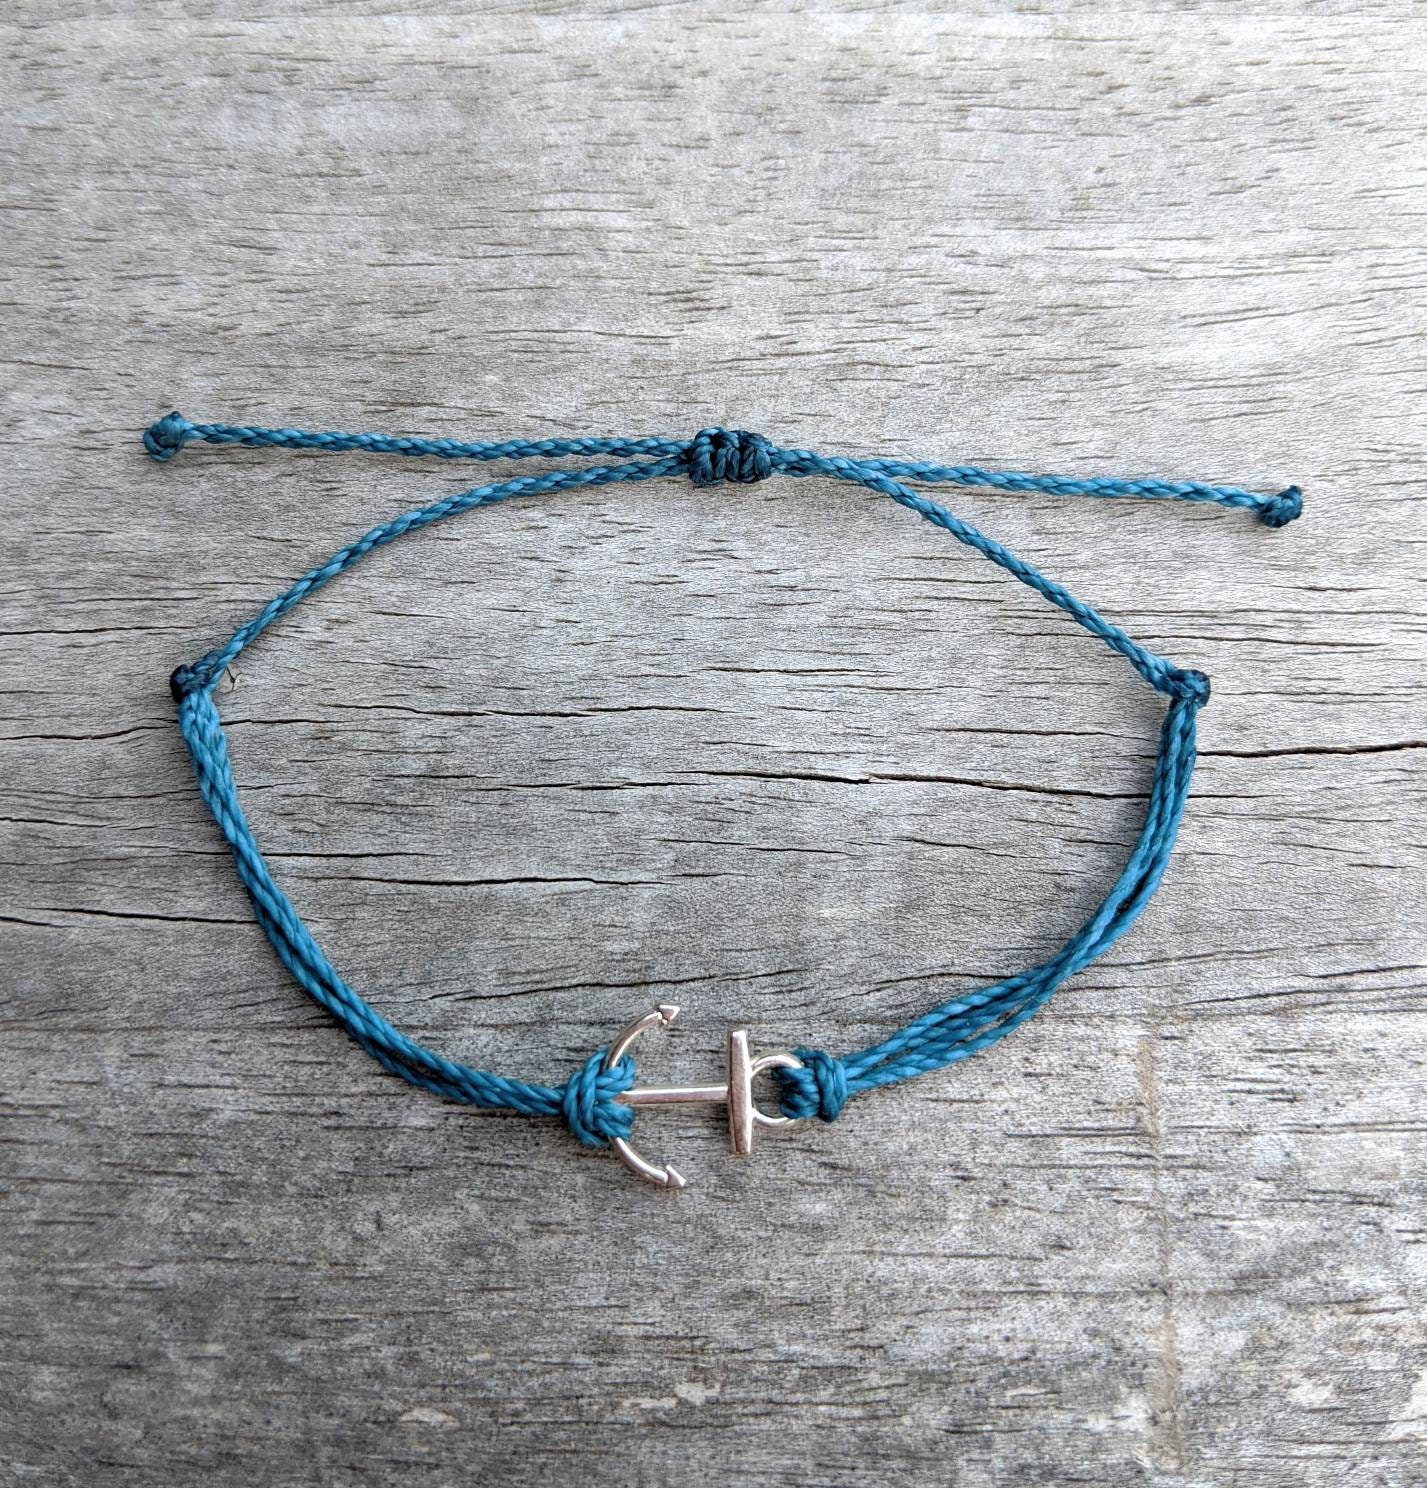 I've seen a lot of anchor bracelets online recently, but I never wanted to  drop $40 on one, so I made a few for about $3 each over break. How do they